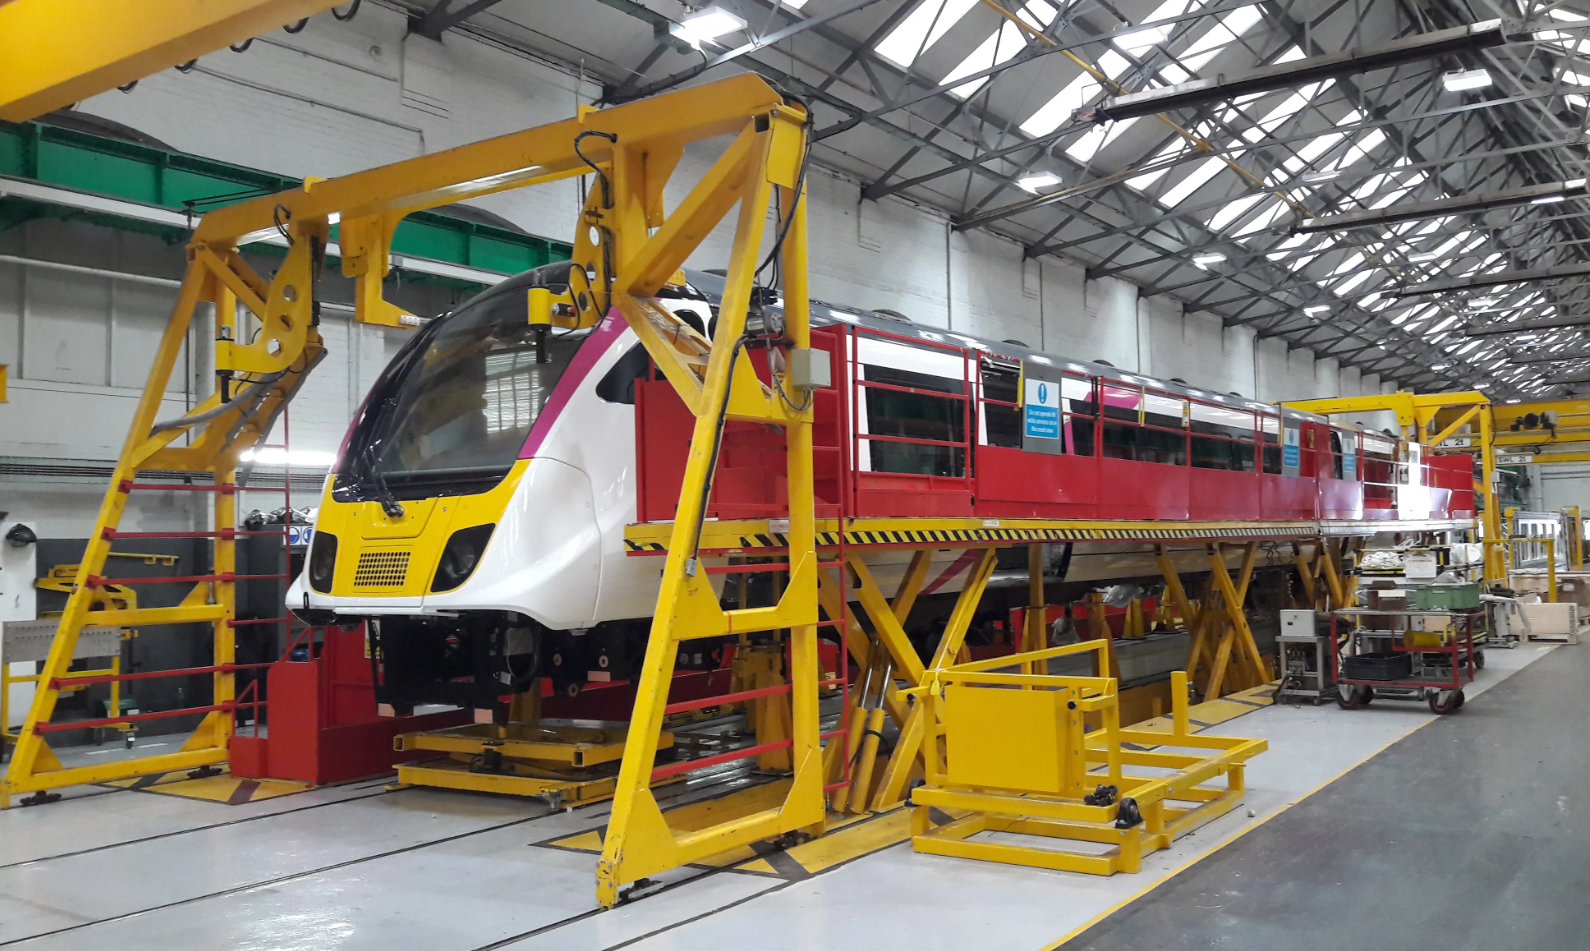 Production of the Alstom Aventra cars at the Derby plant in the UK